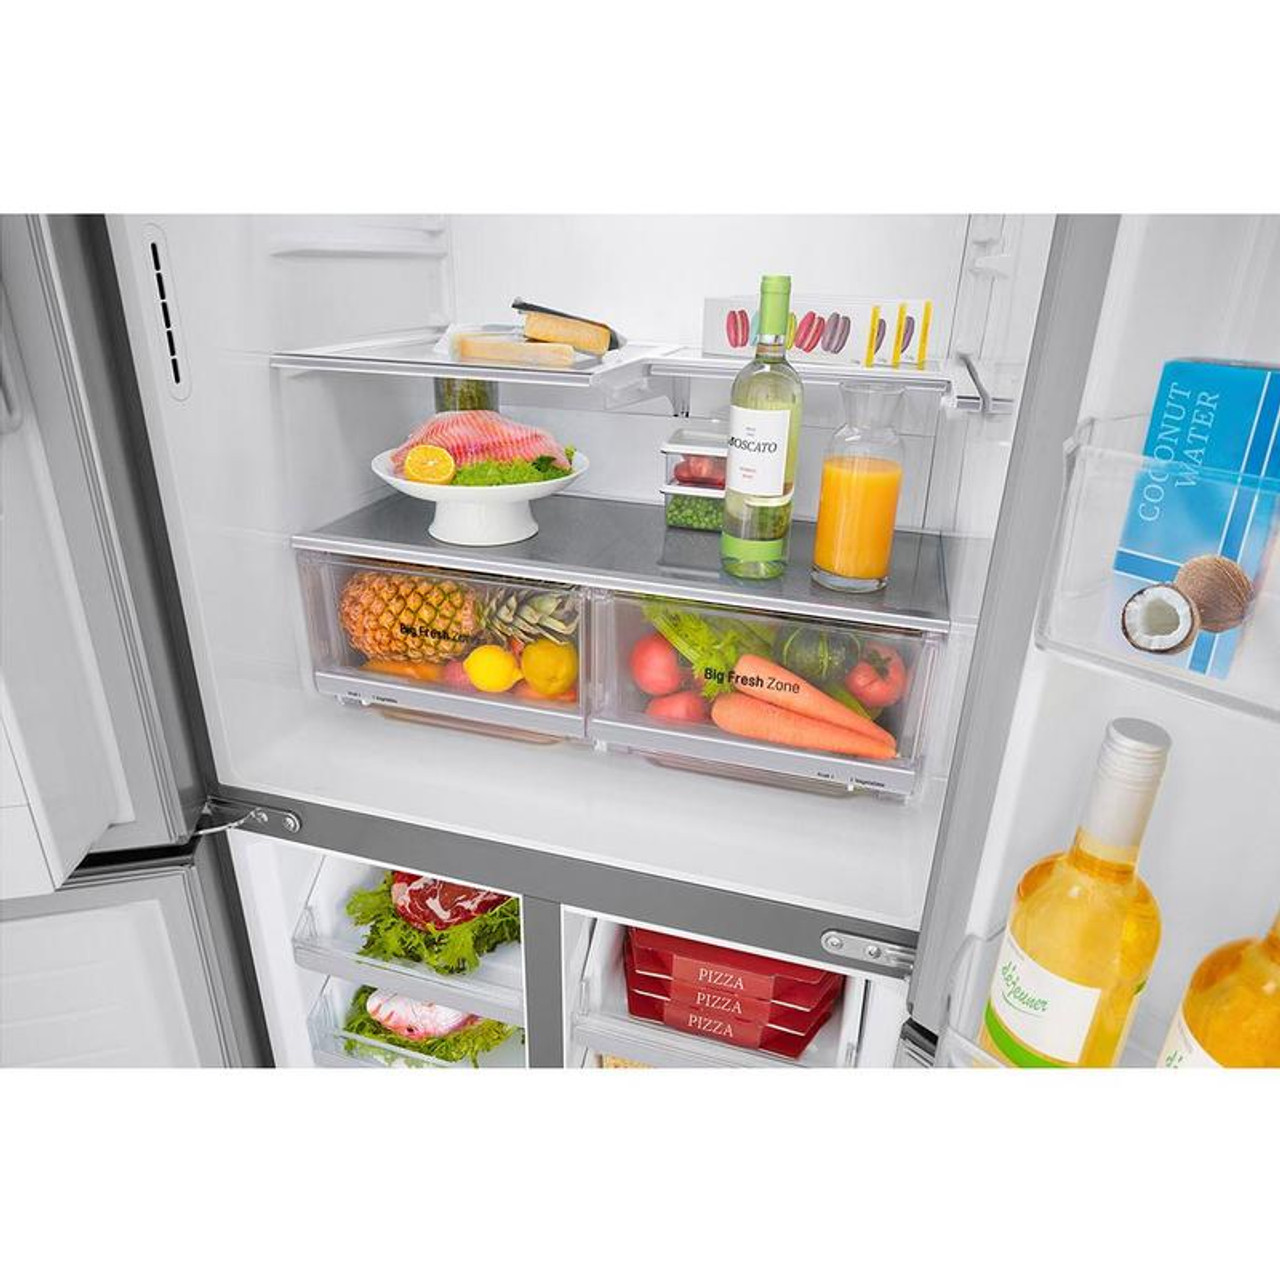 GF-L570PL - 570L Slim French Door Fridge with Ice & Water - Stainless Steel